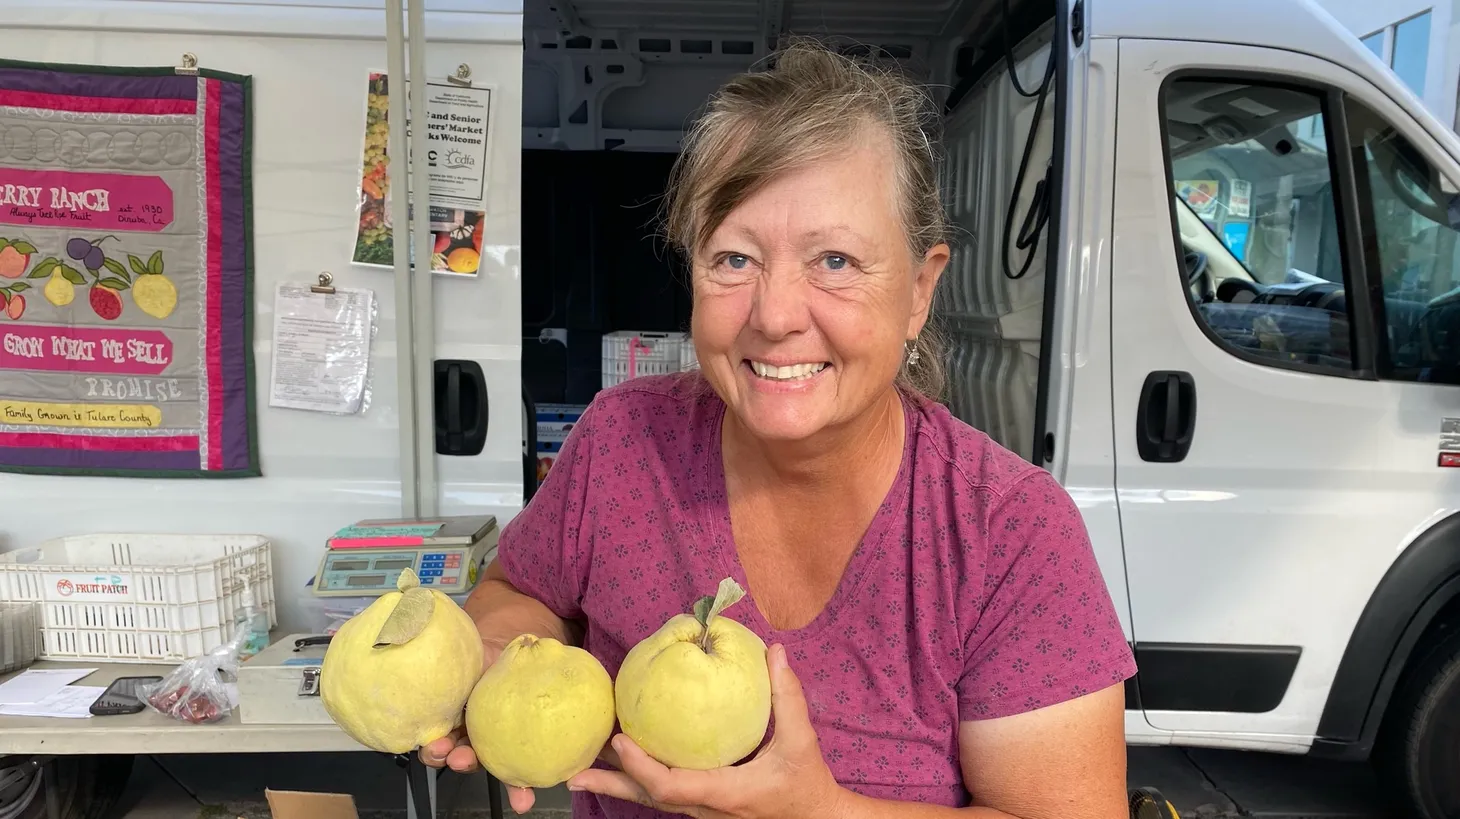 Becky Terry shows off the quince she brings to market.